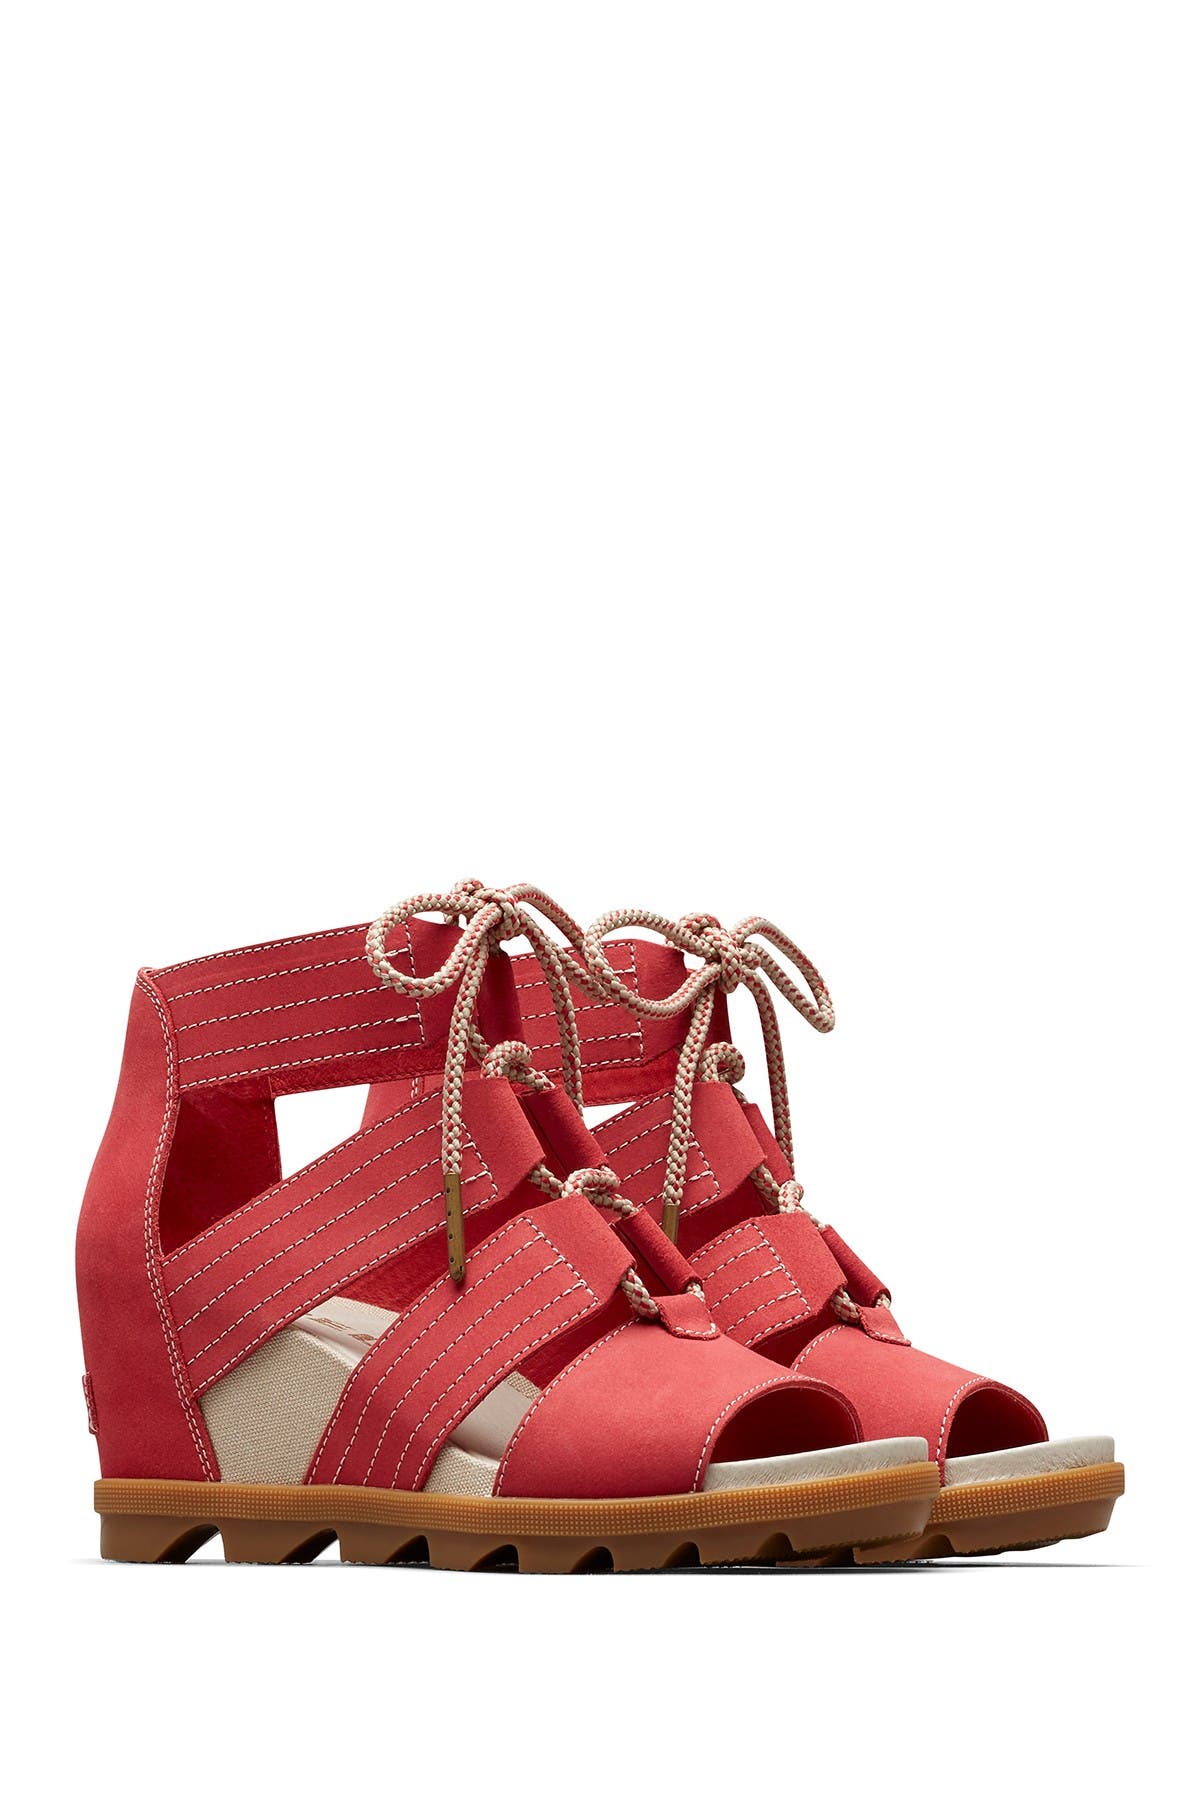 sorel lace up wedge